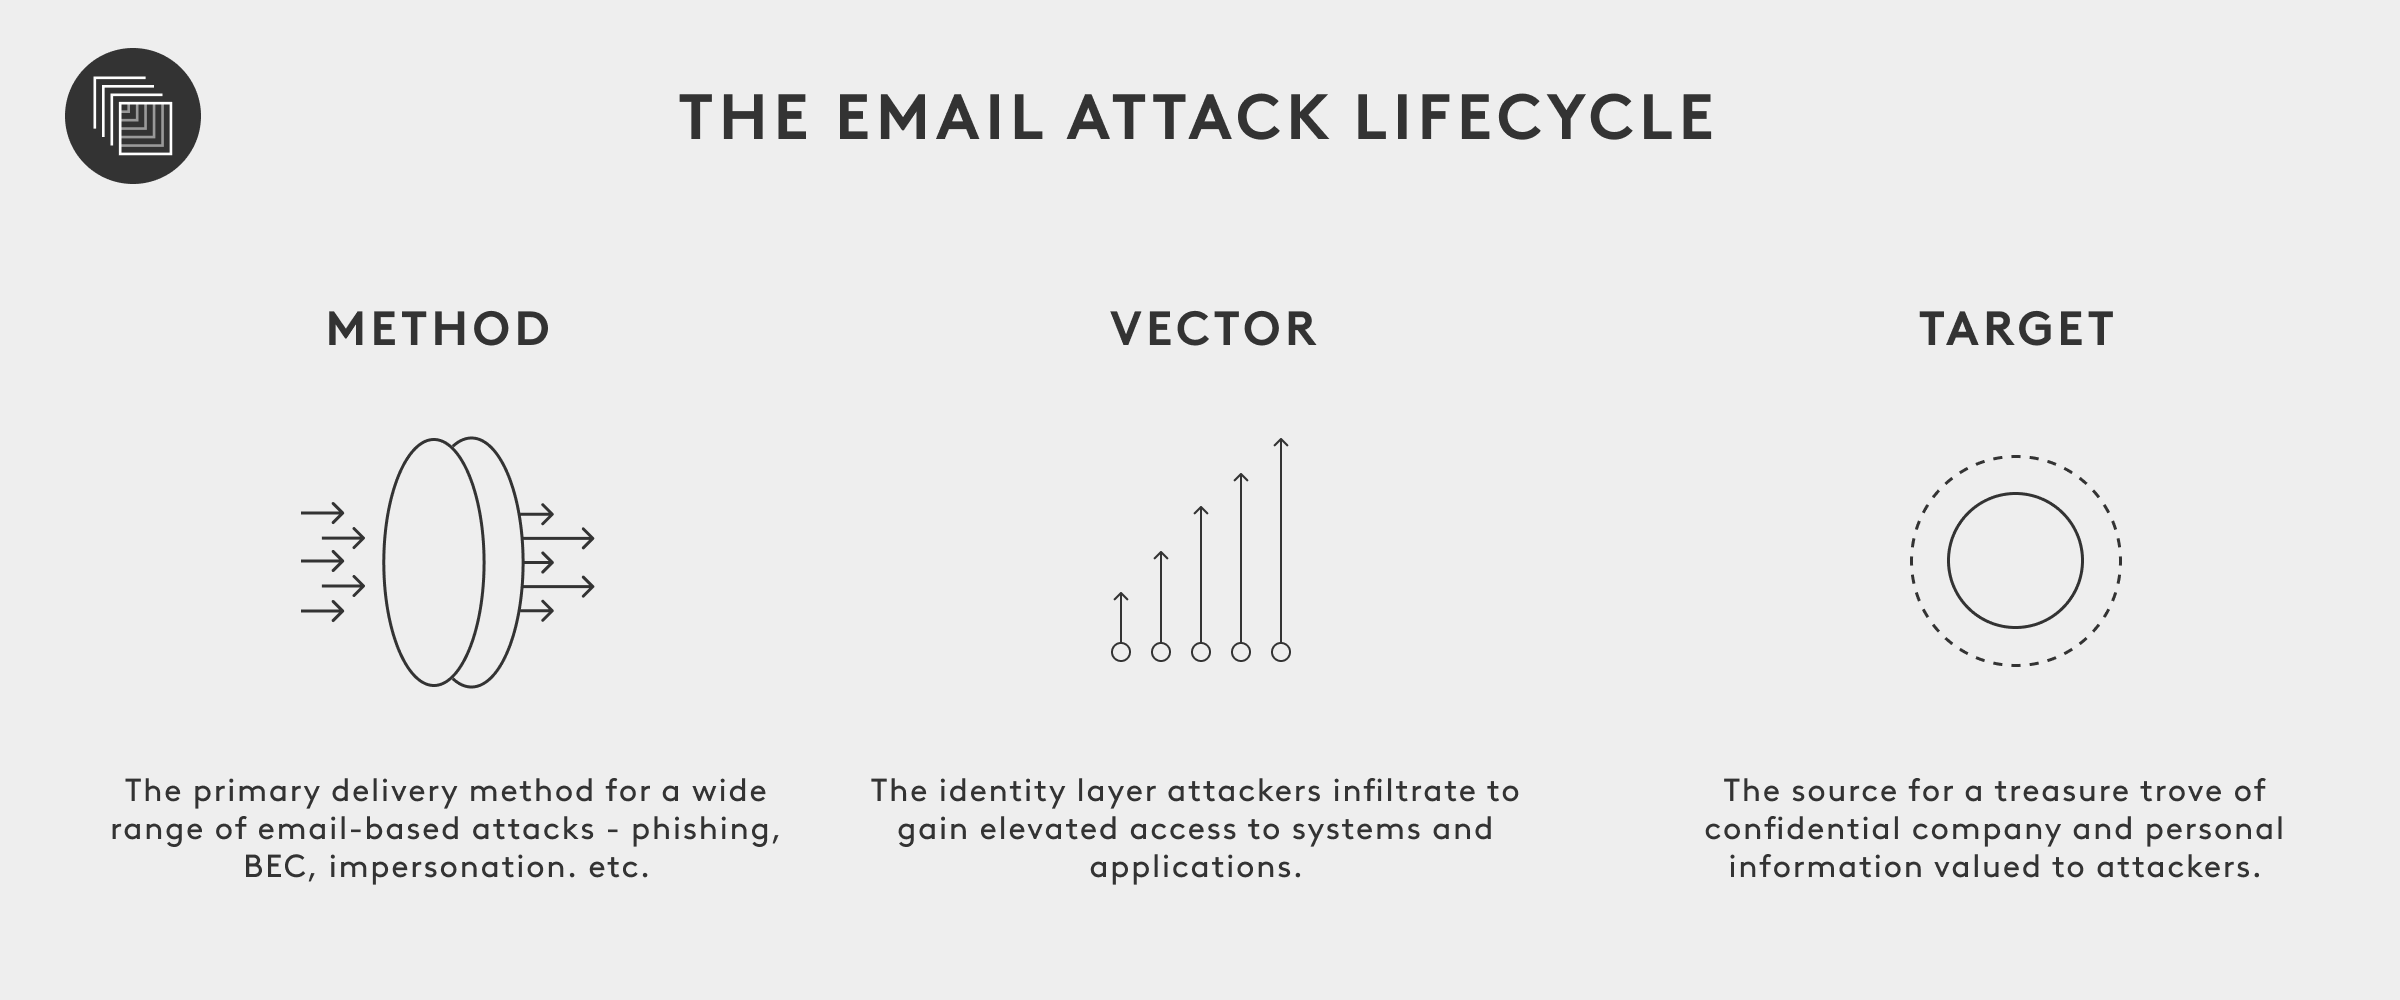 The Email Attack Lifecycle